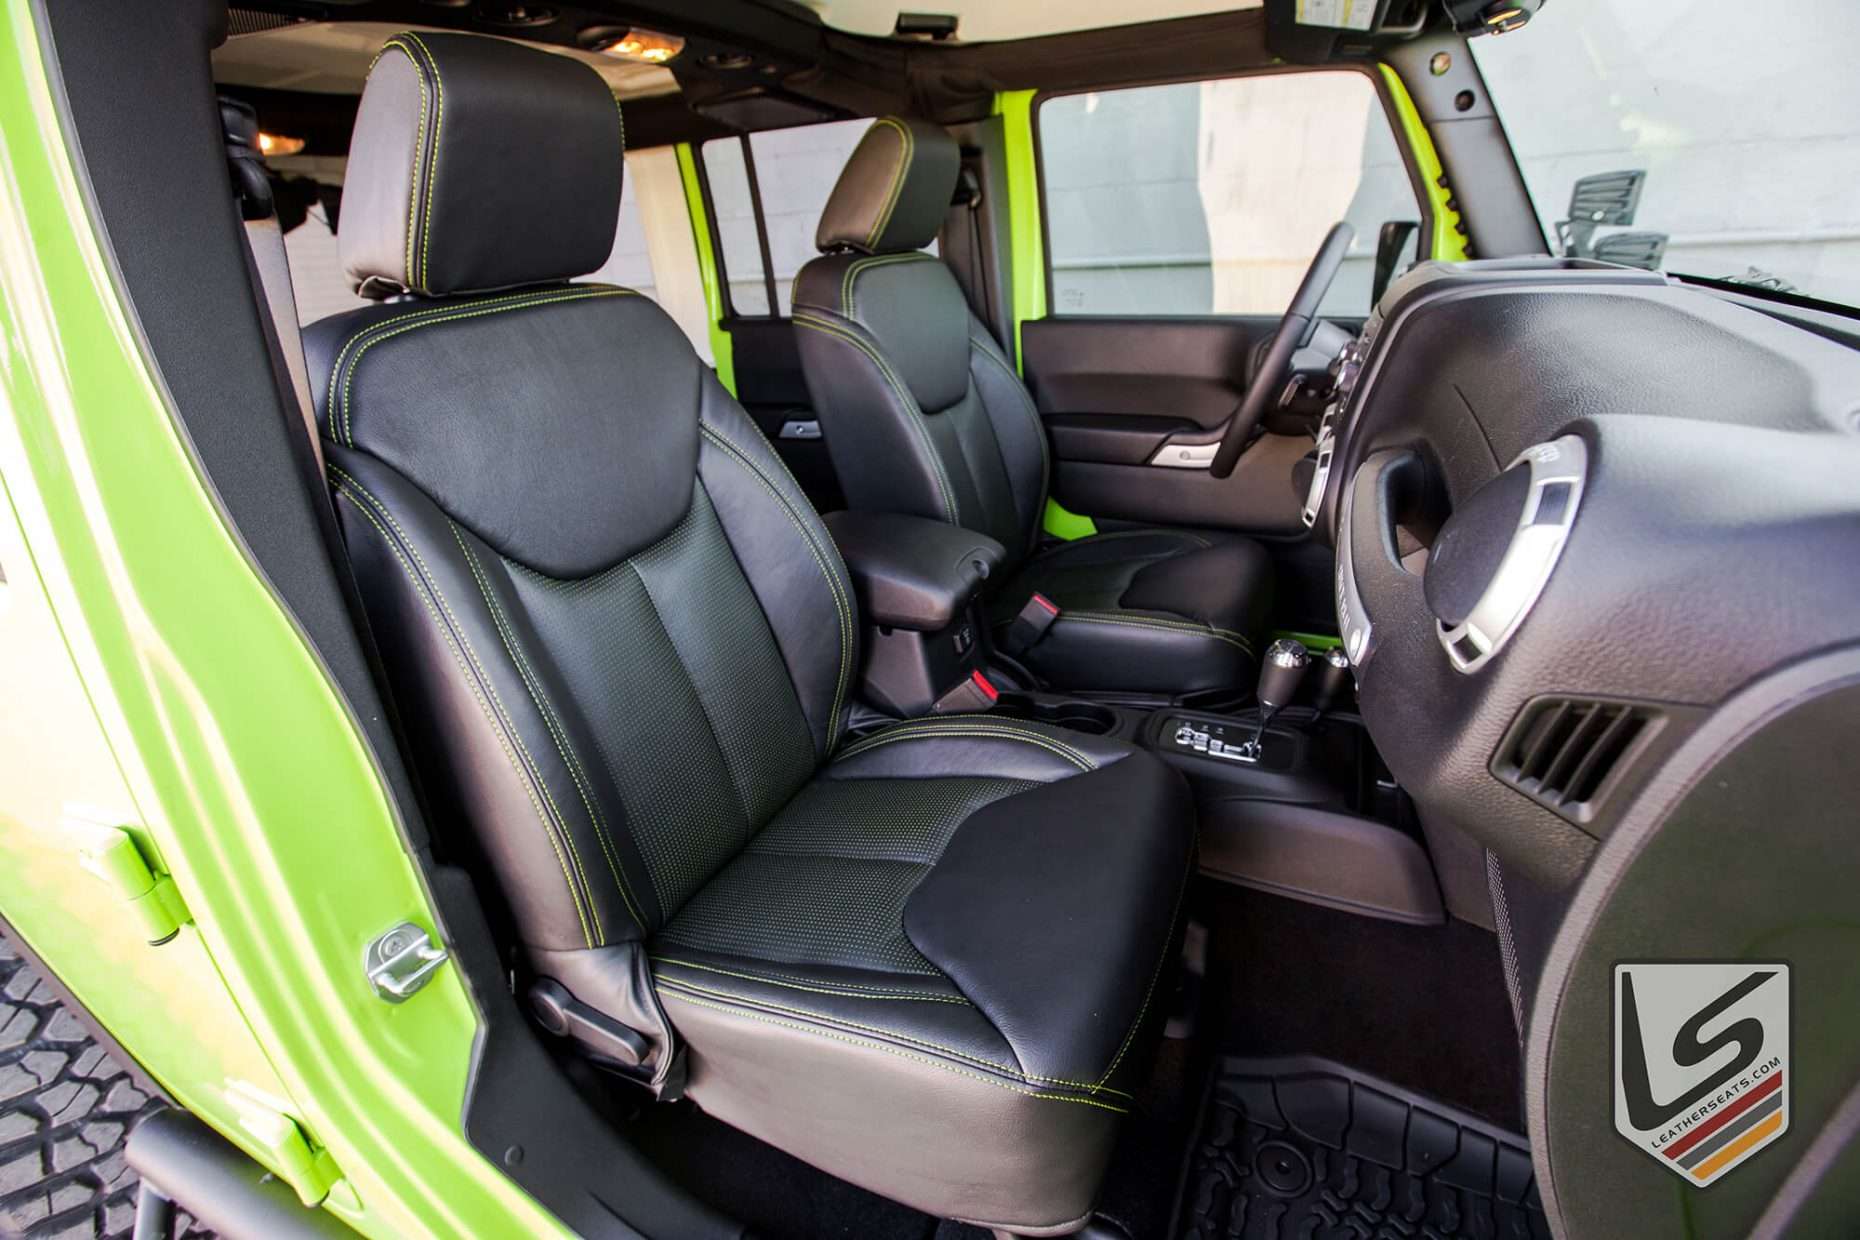 2013-2018 Jeep Wrangler JK with custom leather interior - Black and Piazza Green Inserts